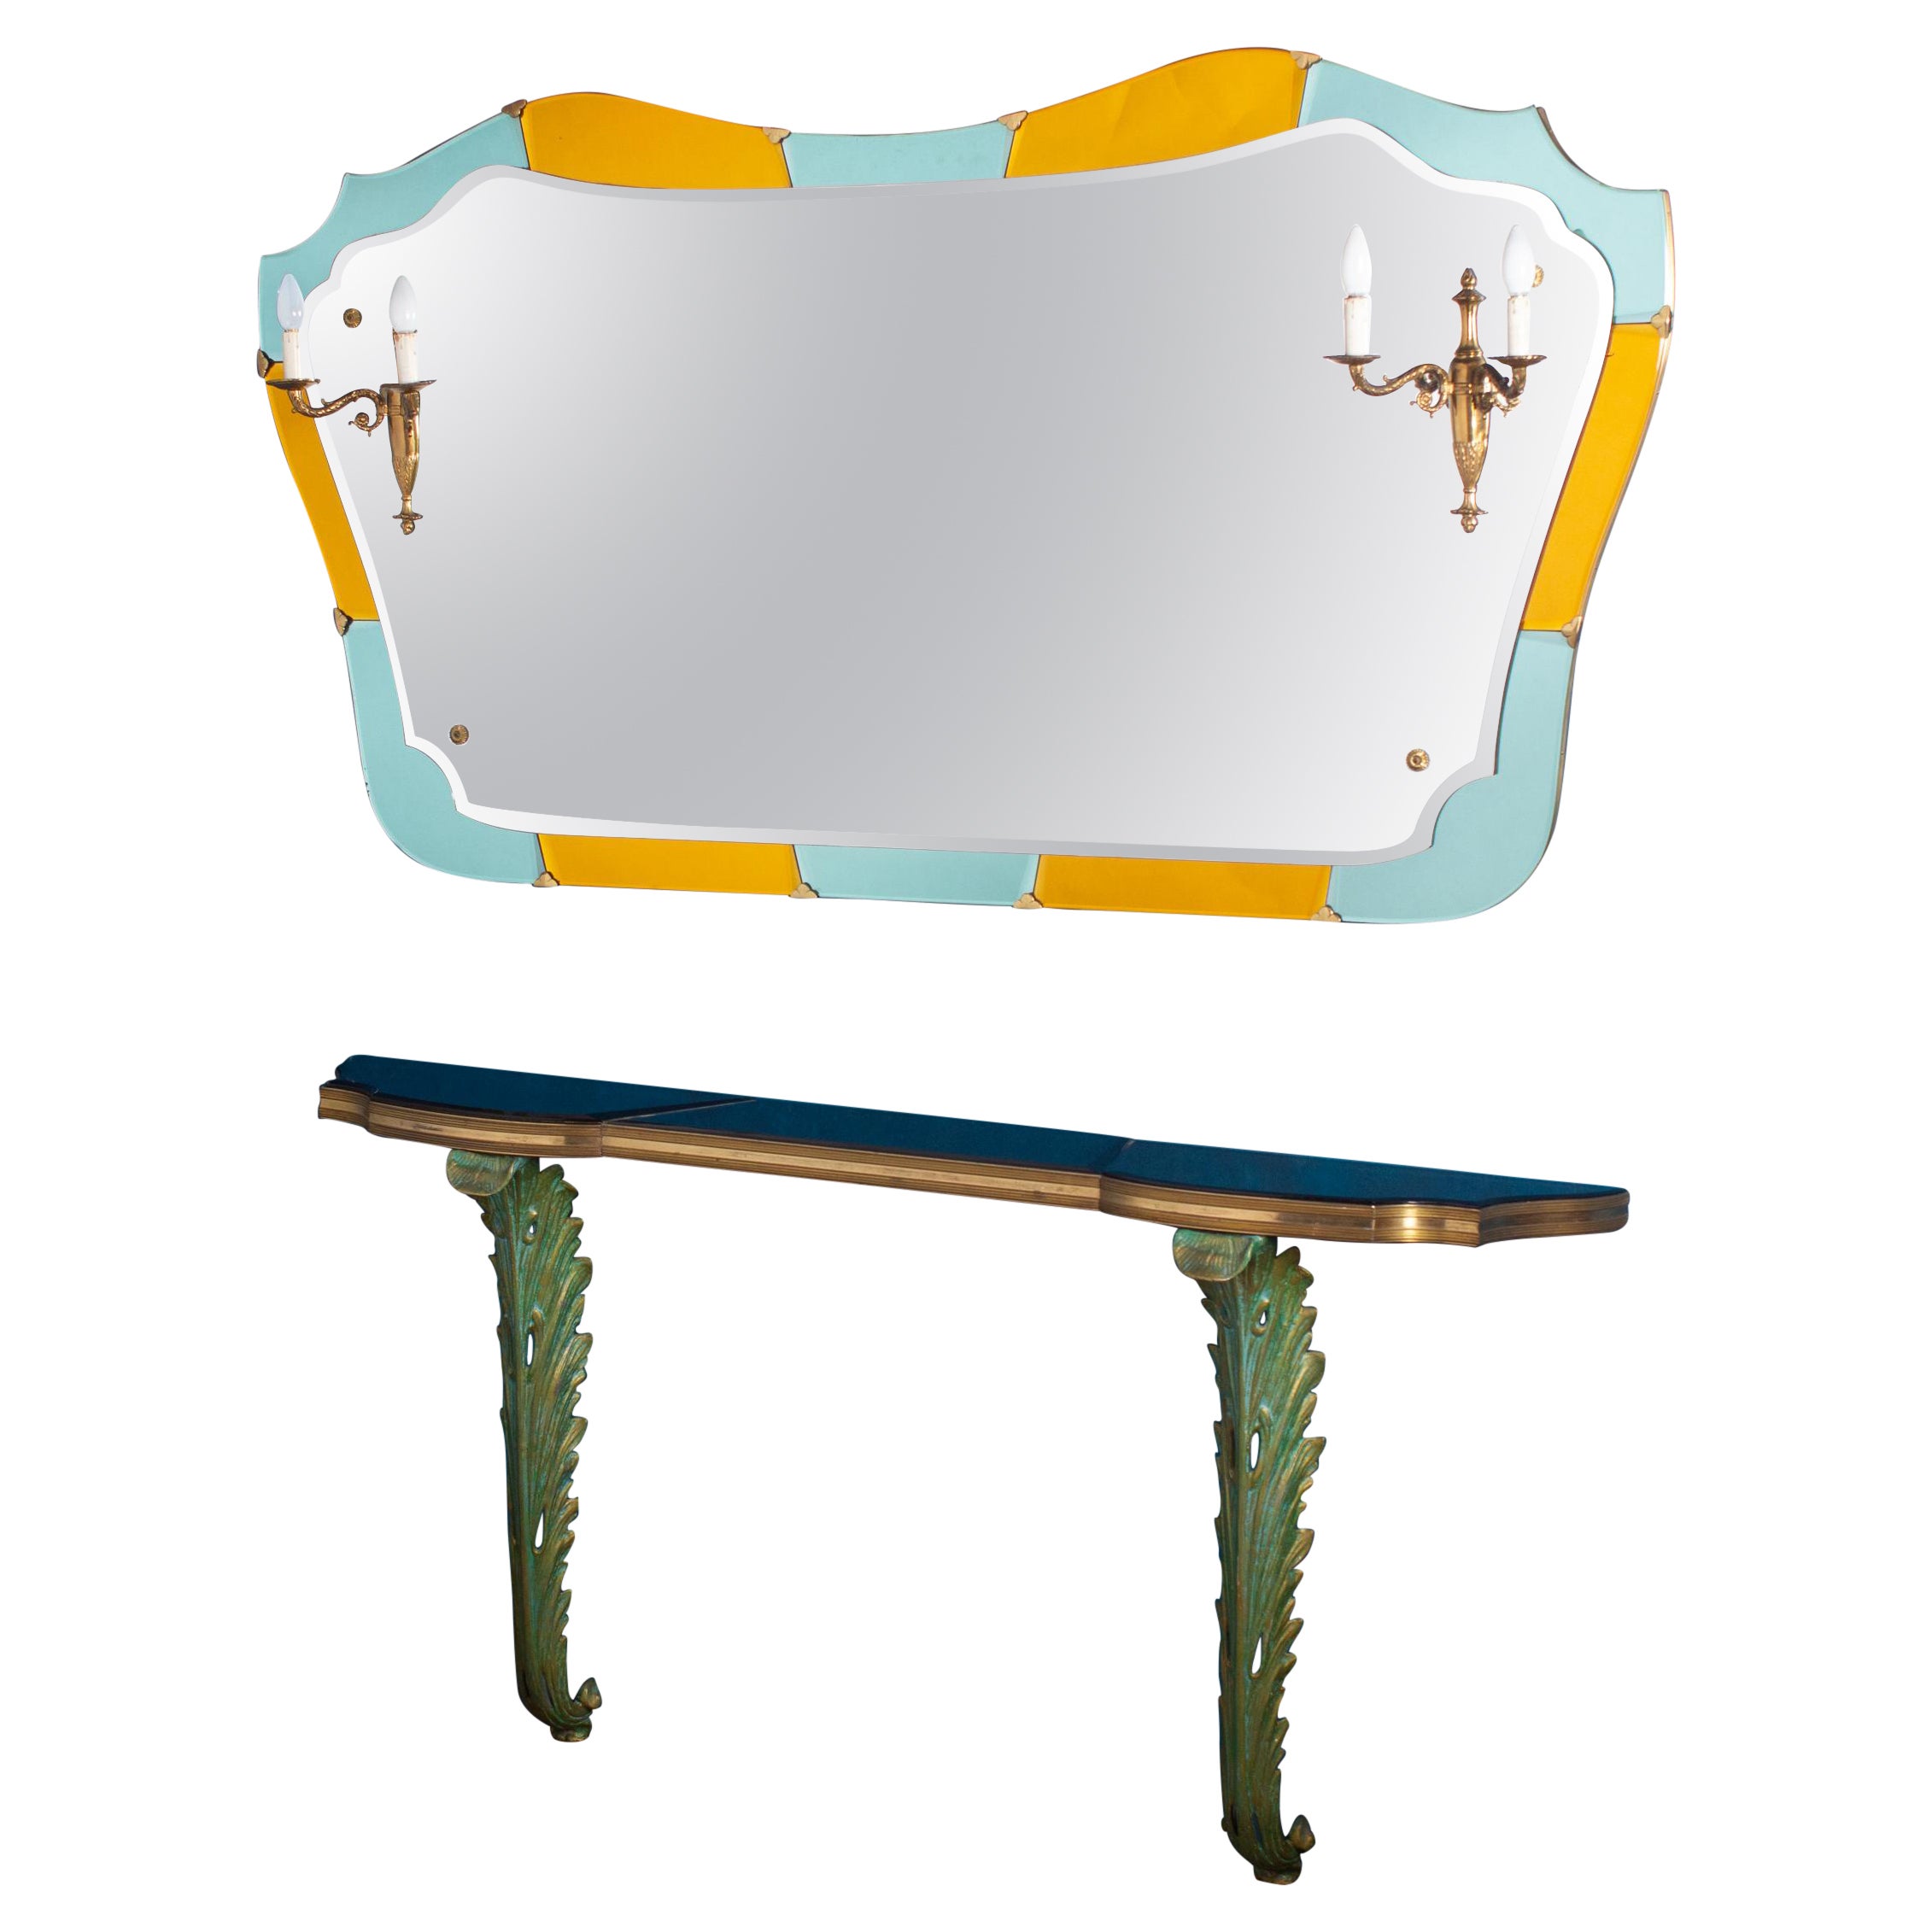 Stunning Midcentury Cristal Art Console Table with Mirror and Sconces, 1950